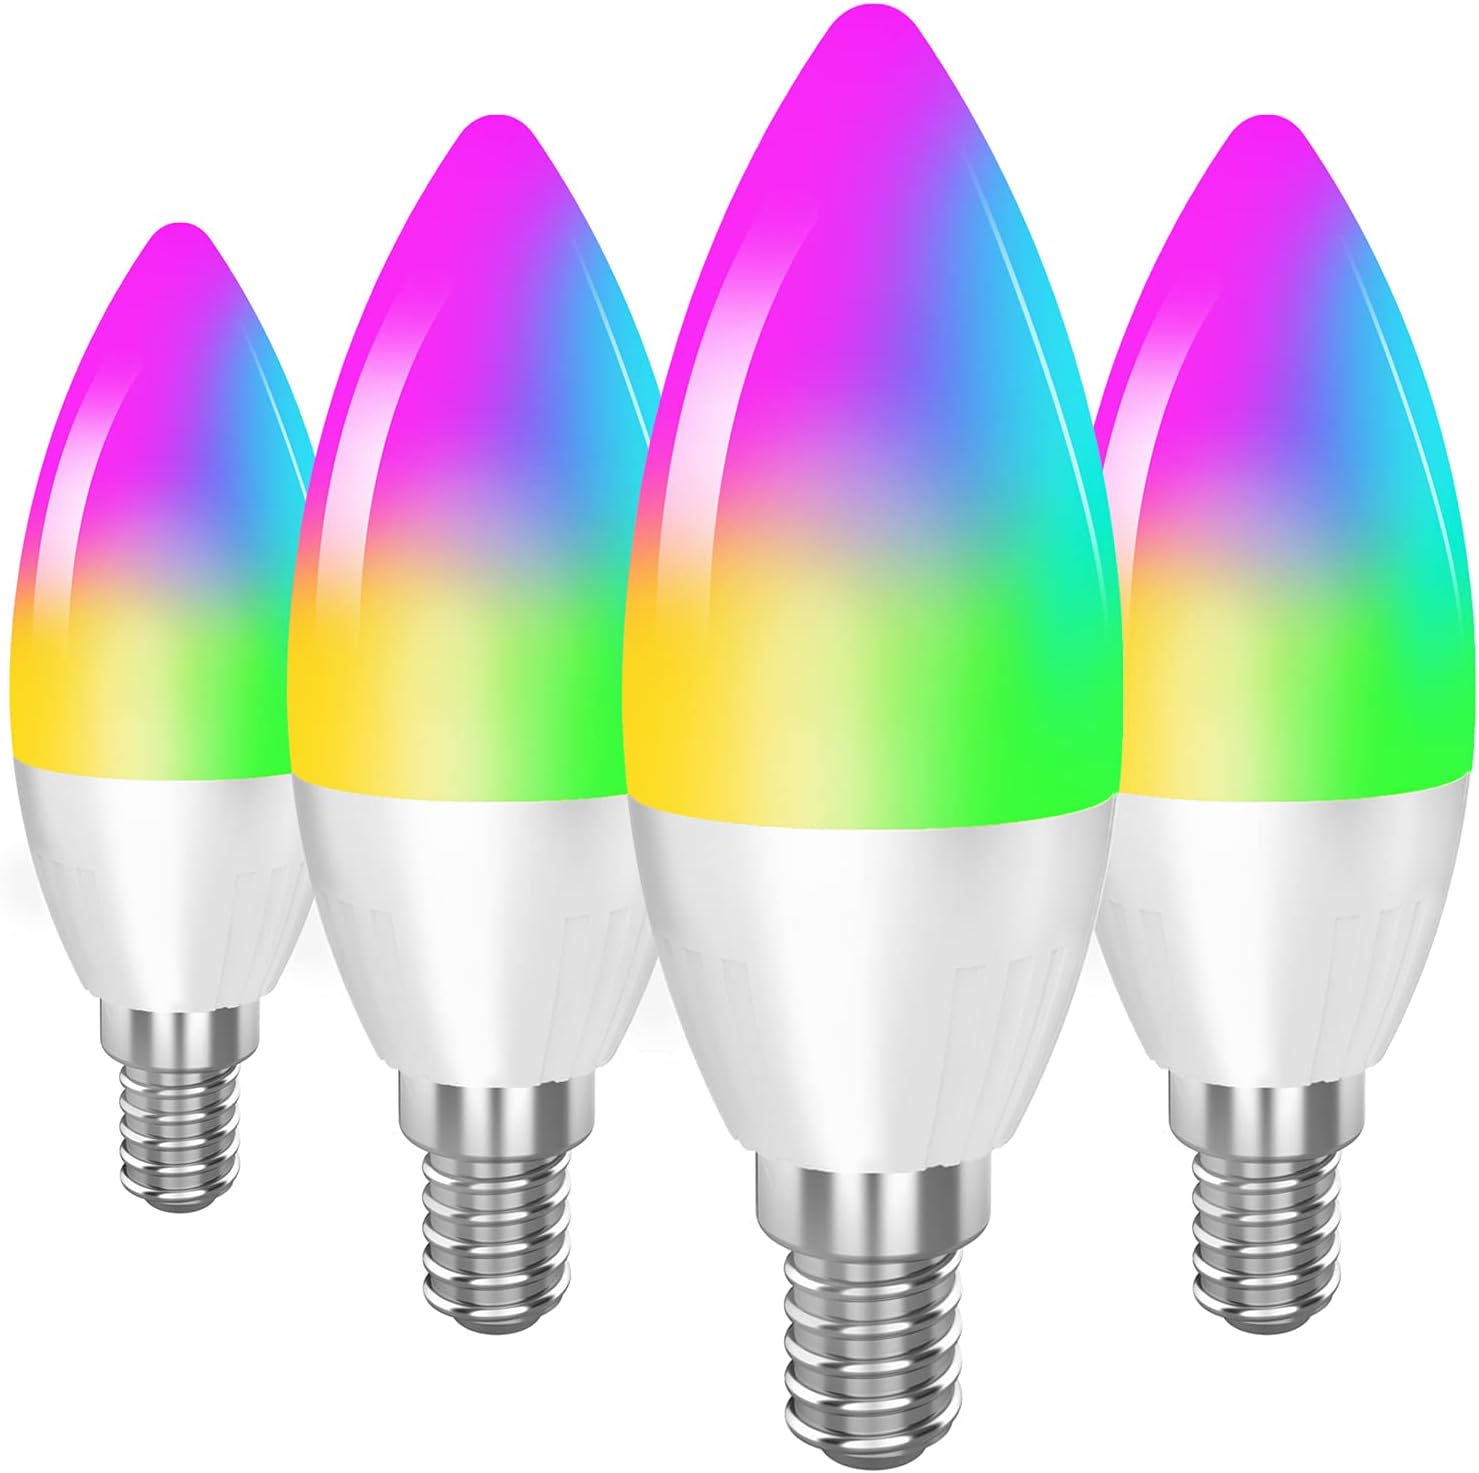 DOGAIN Smart Light Bulb Works with Alexa Google Home E12 Base WiFi Candelabra LED Light Bulb Color Changing Dimmable Chandelier Light Bulbs 360 lm 35w Equivalent 4 Pack (2.4GHz WiFi Only)